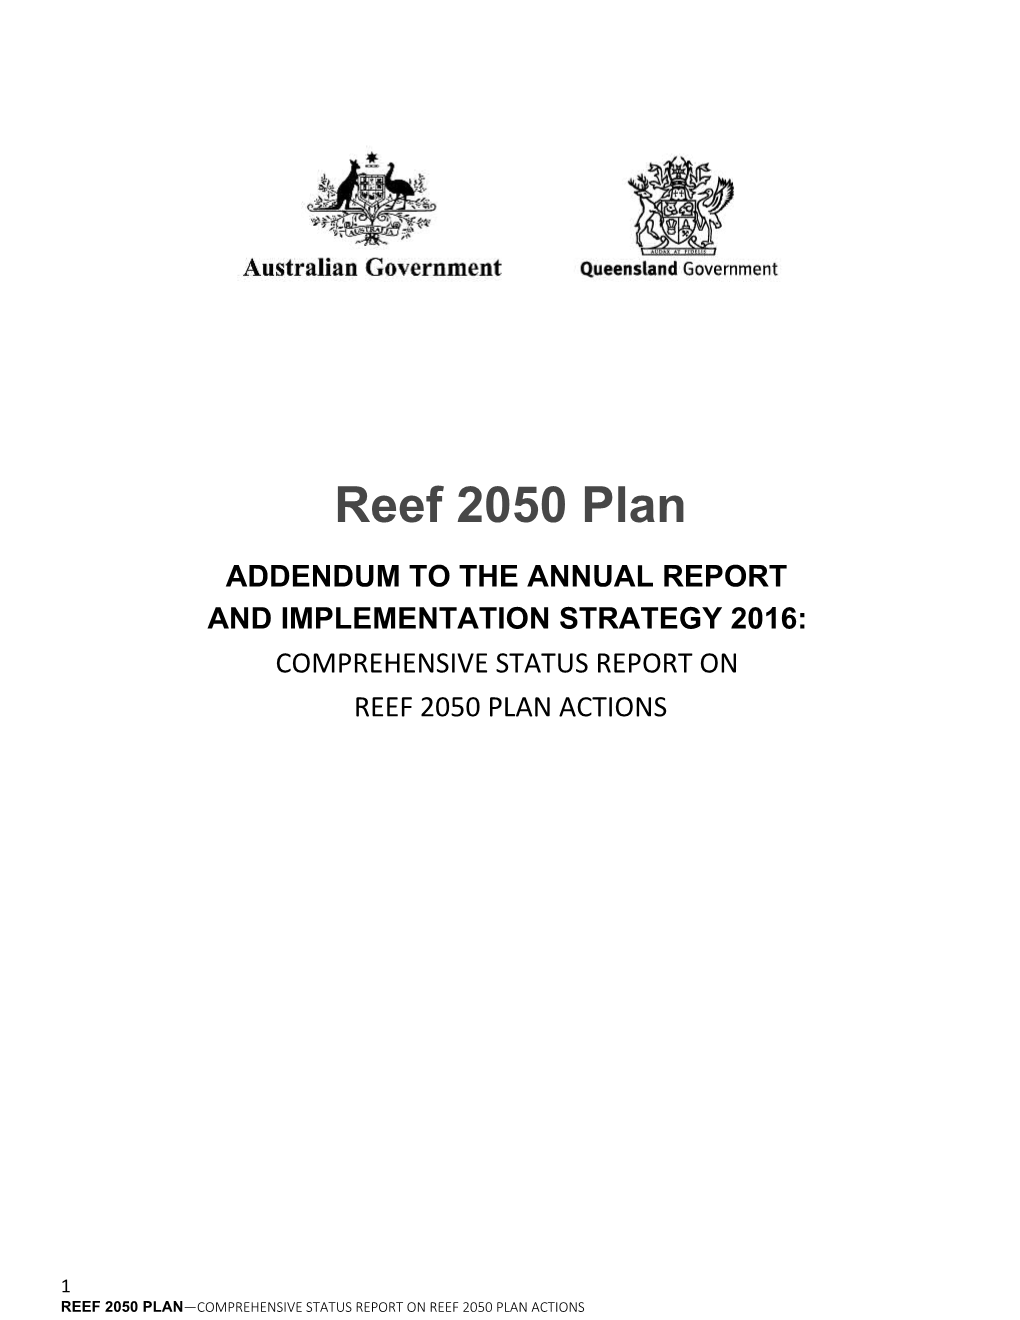 Addendum to the Annual Report and Implementation Strategy 2016: Comprehensive Status Report